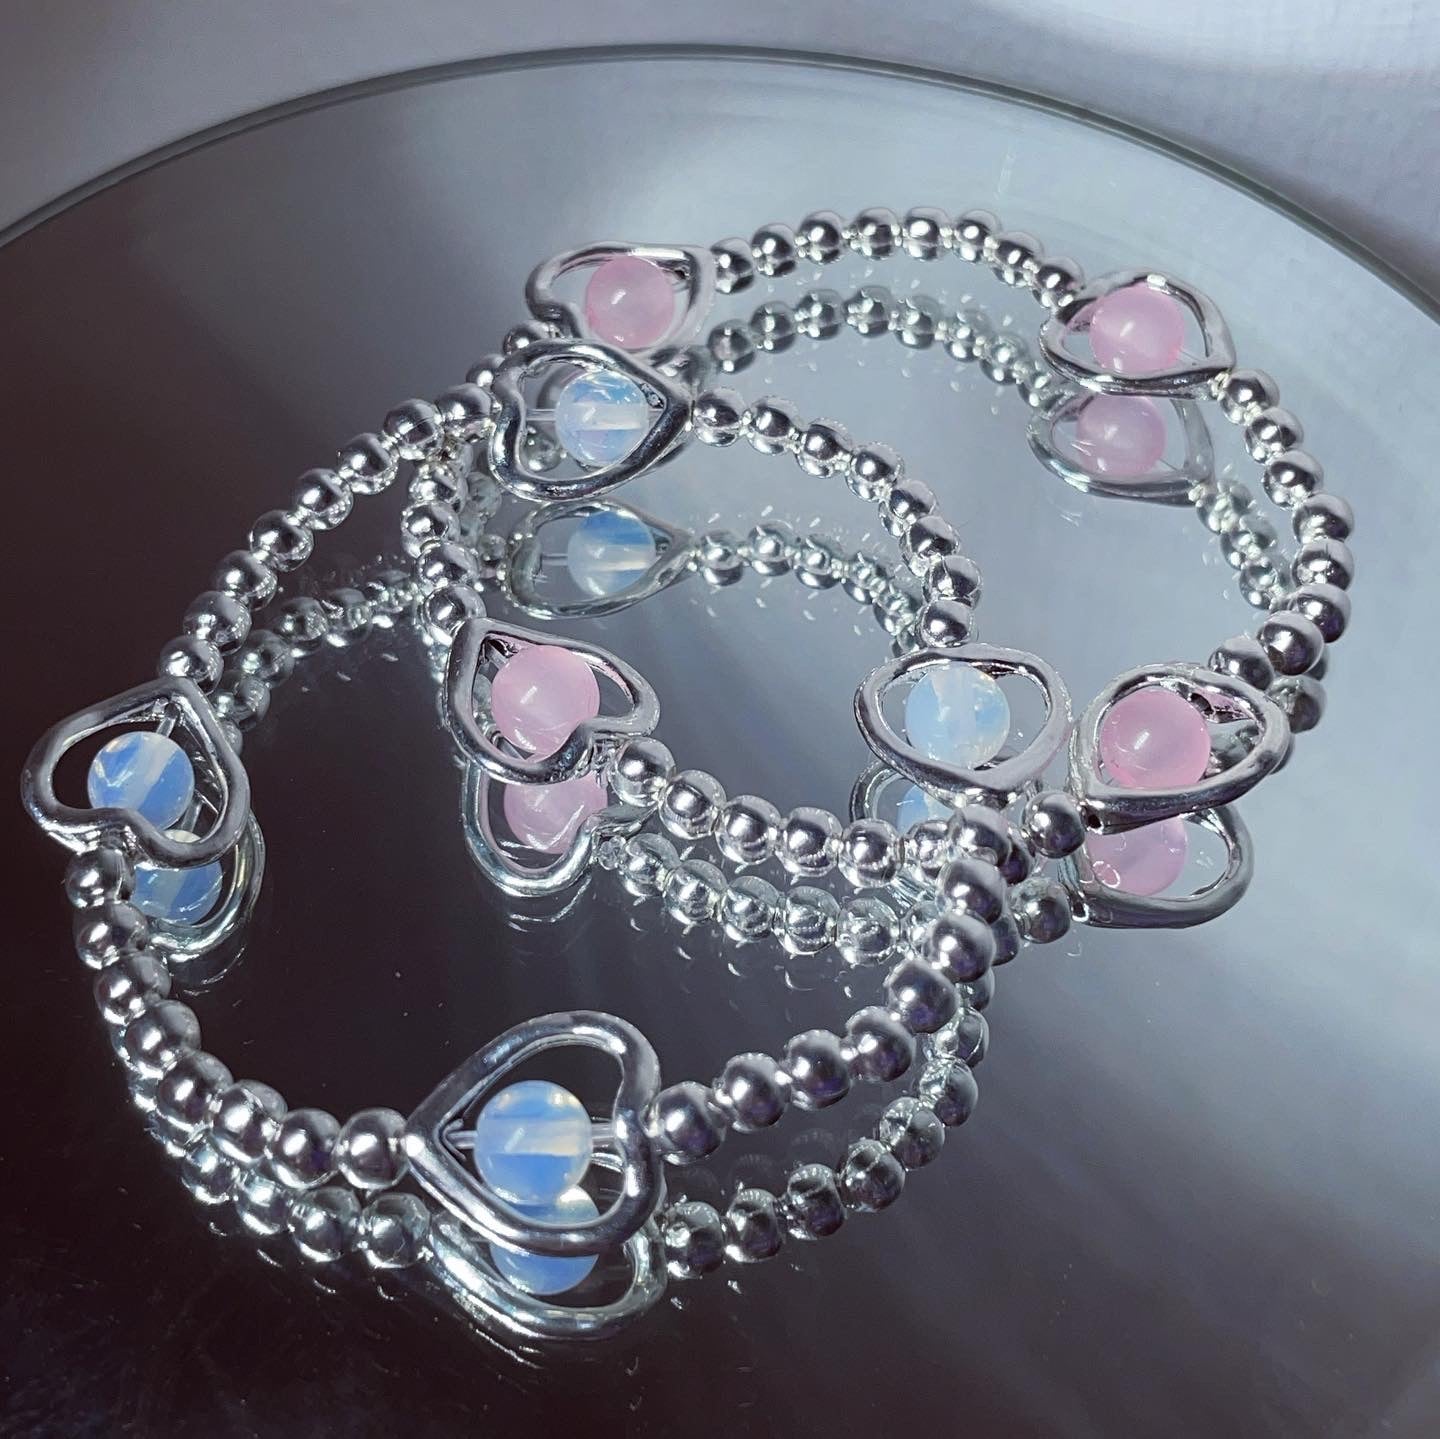 Crystal anxiety relief heart spinning fidget bracelet